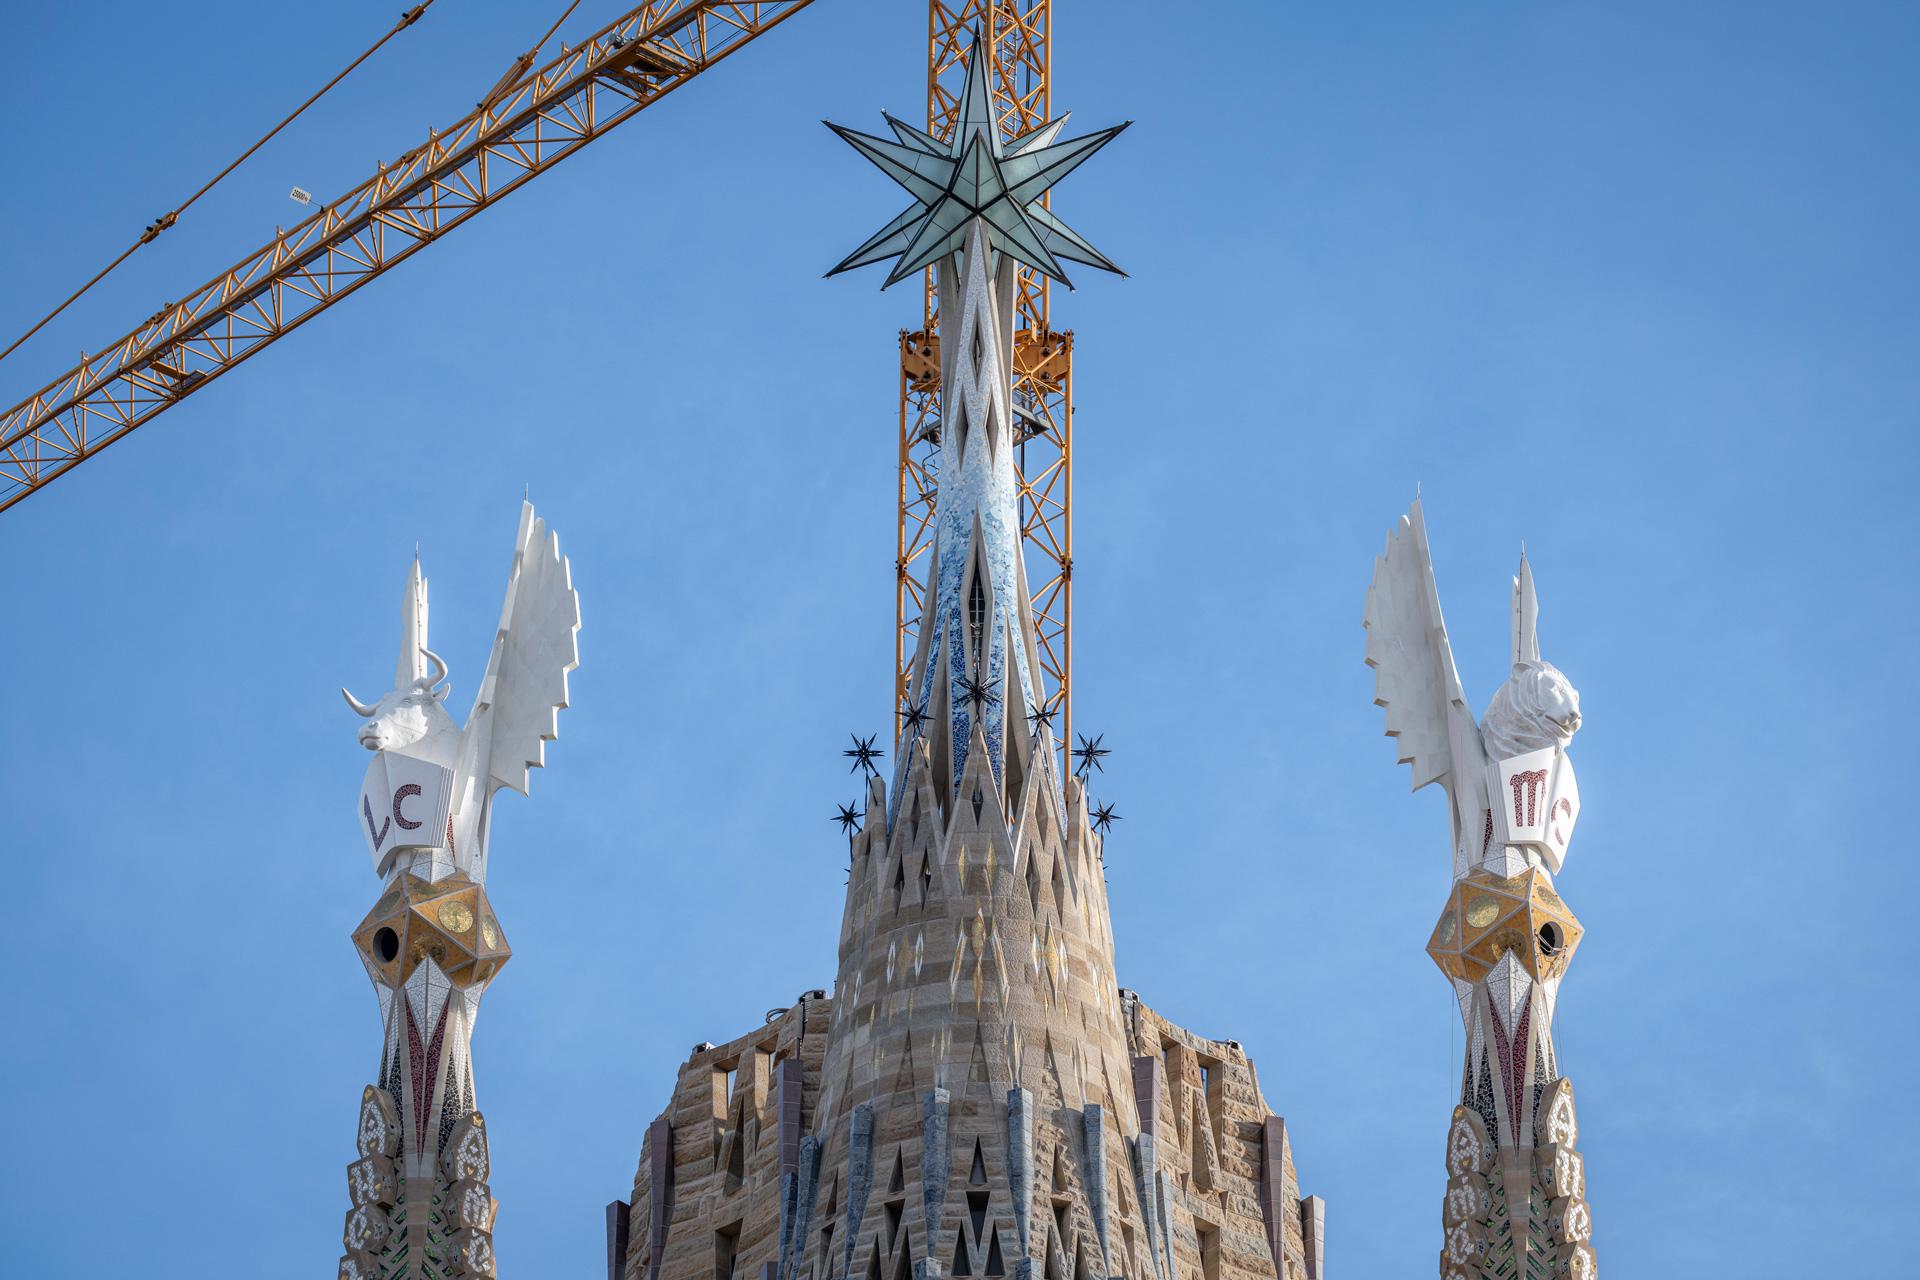 Star now crowns tower of the Virgin Mary